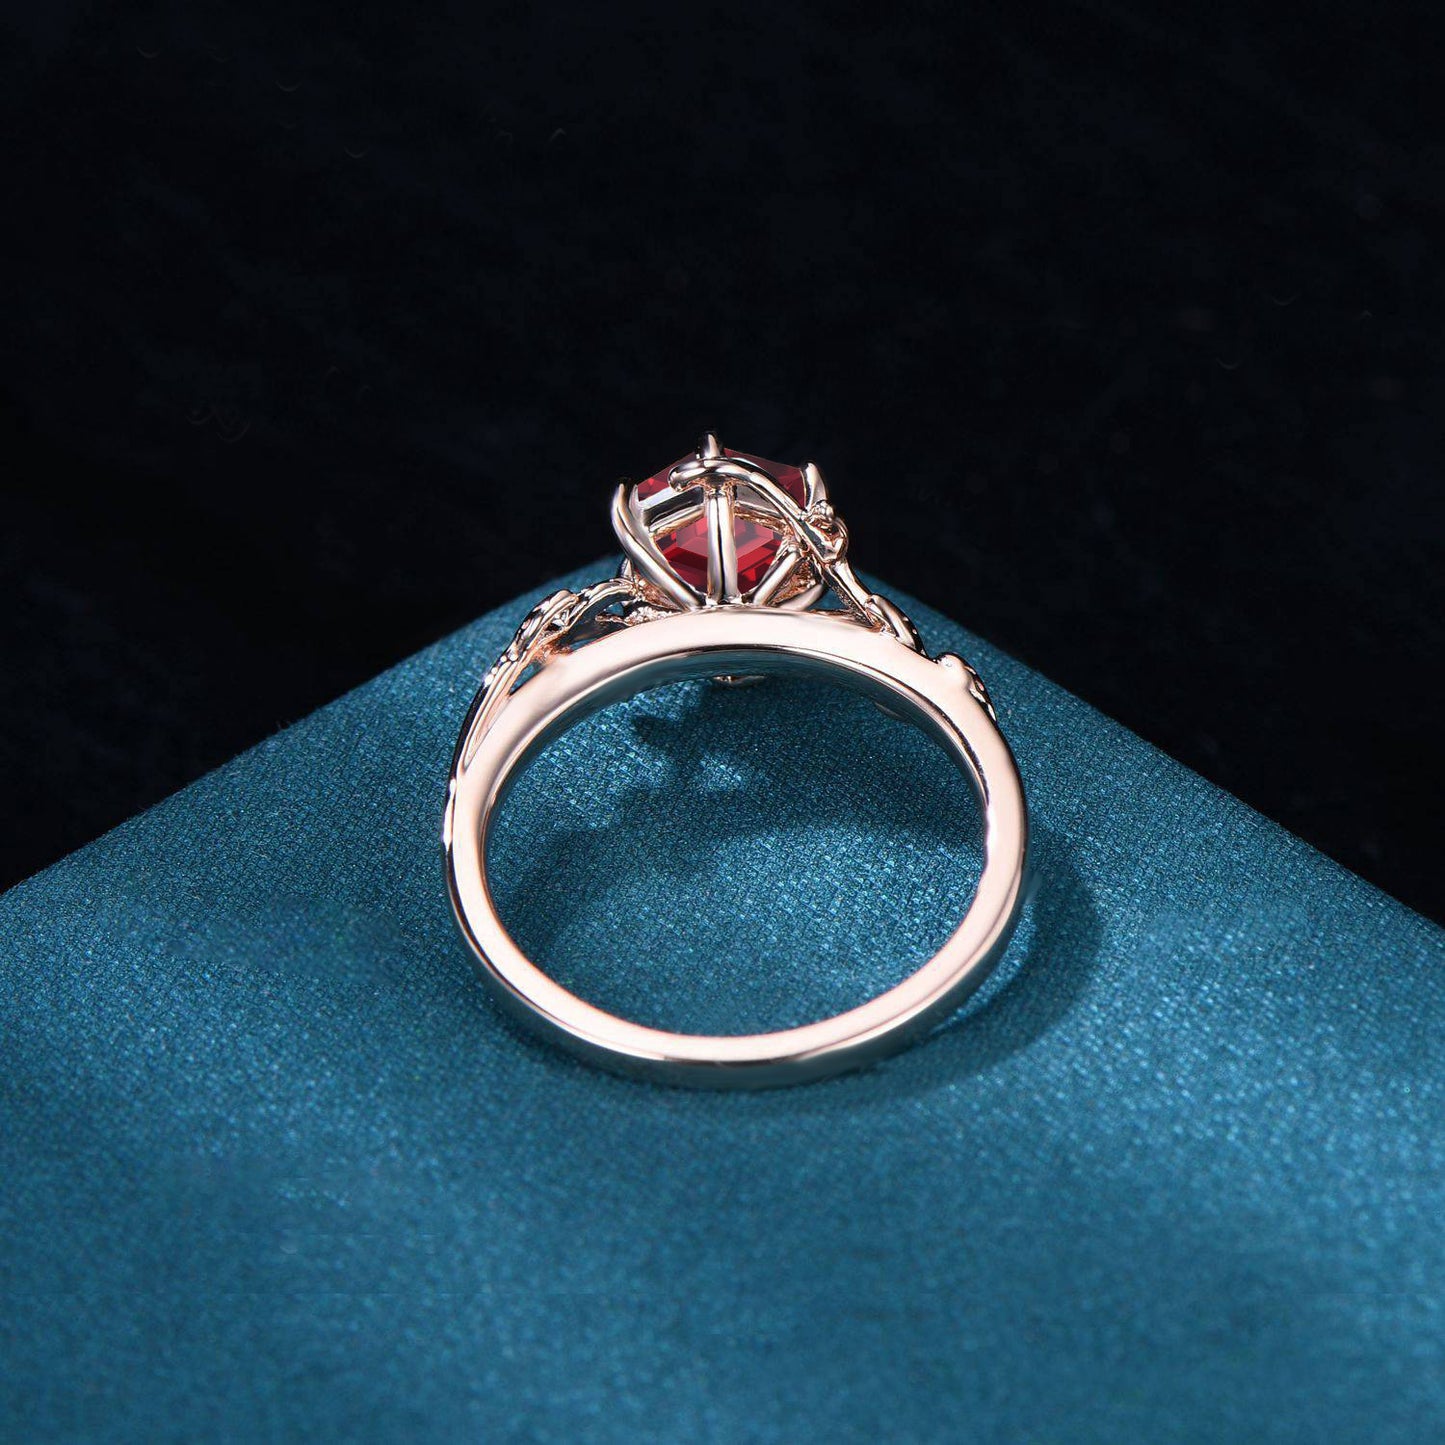 Hexagon Cut Ruby Engagement Ring Rose Gold Celtic Wedding Ring Branch Leaf Ruby Ring Red Gemstone Ring July Birthstone Proposal Women Gifts